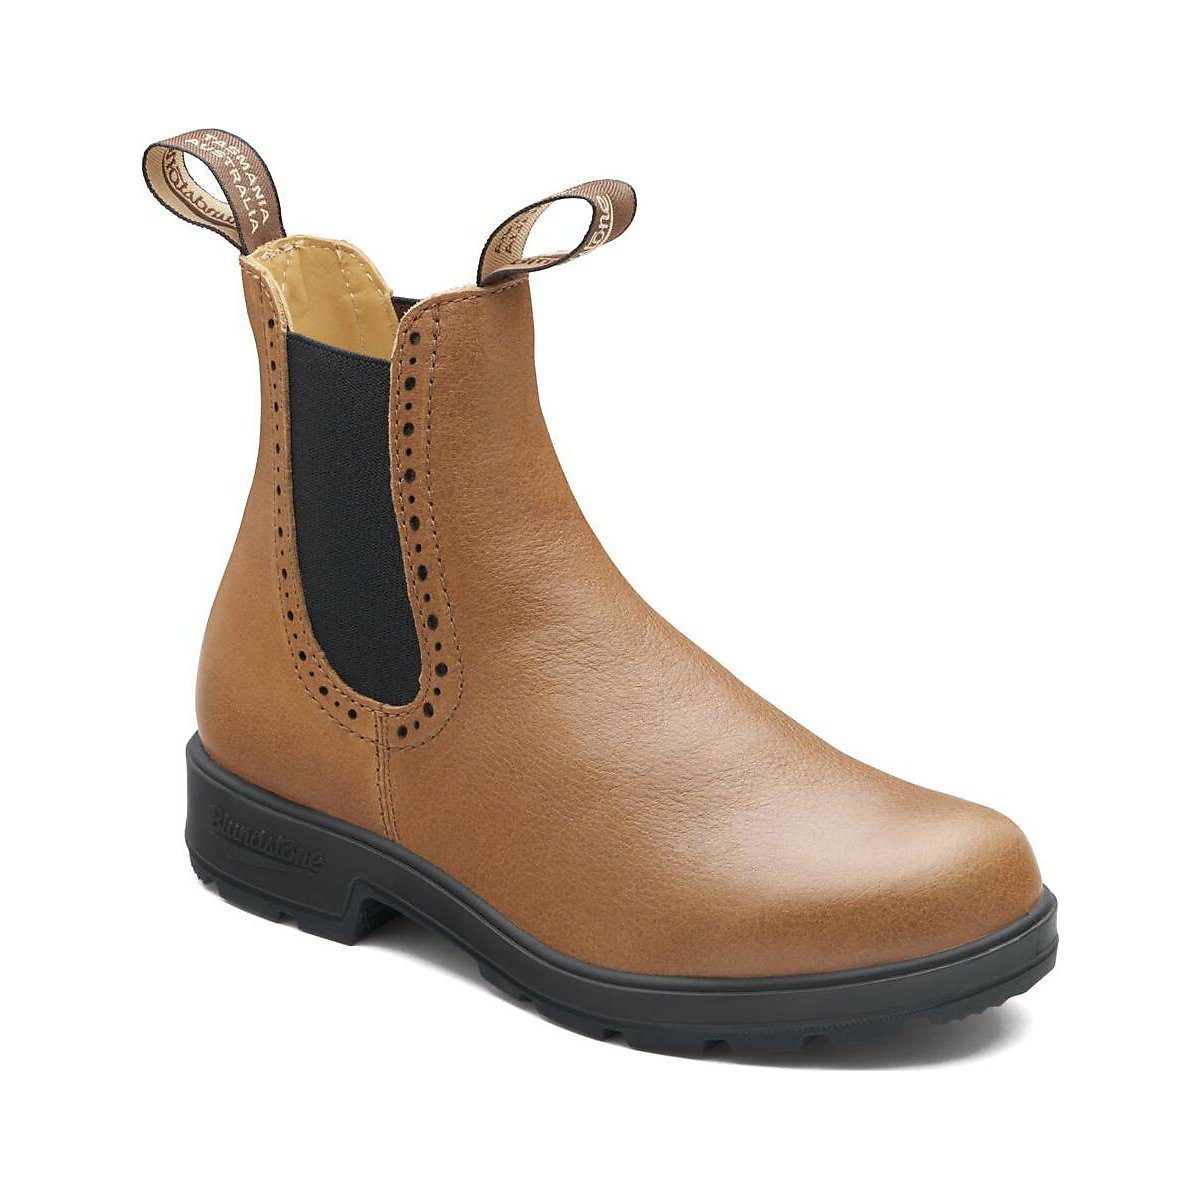 Blundstone 2215 Camel Leather (women's Hi-top) Chelsea Boots Chelseaboots